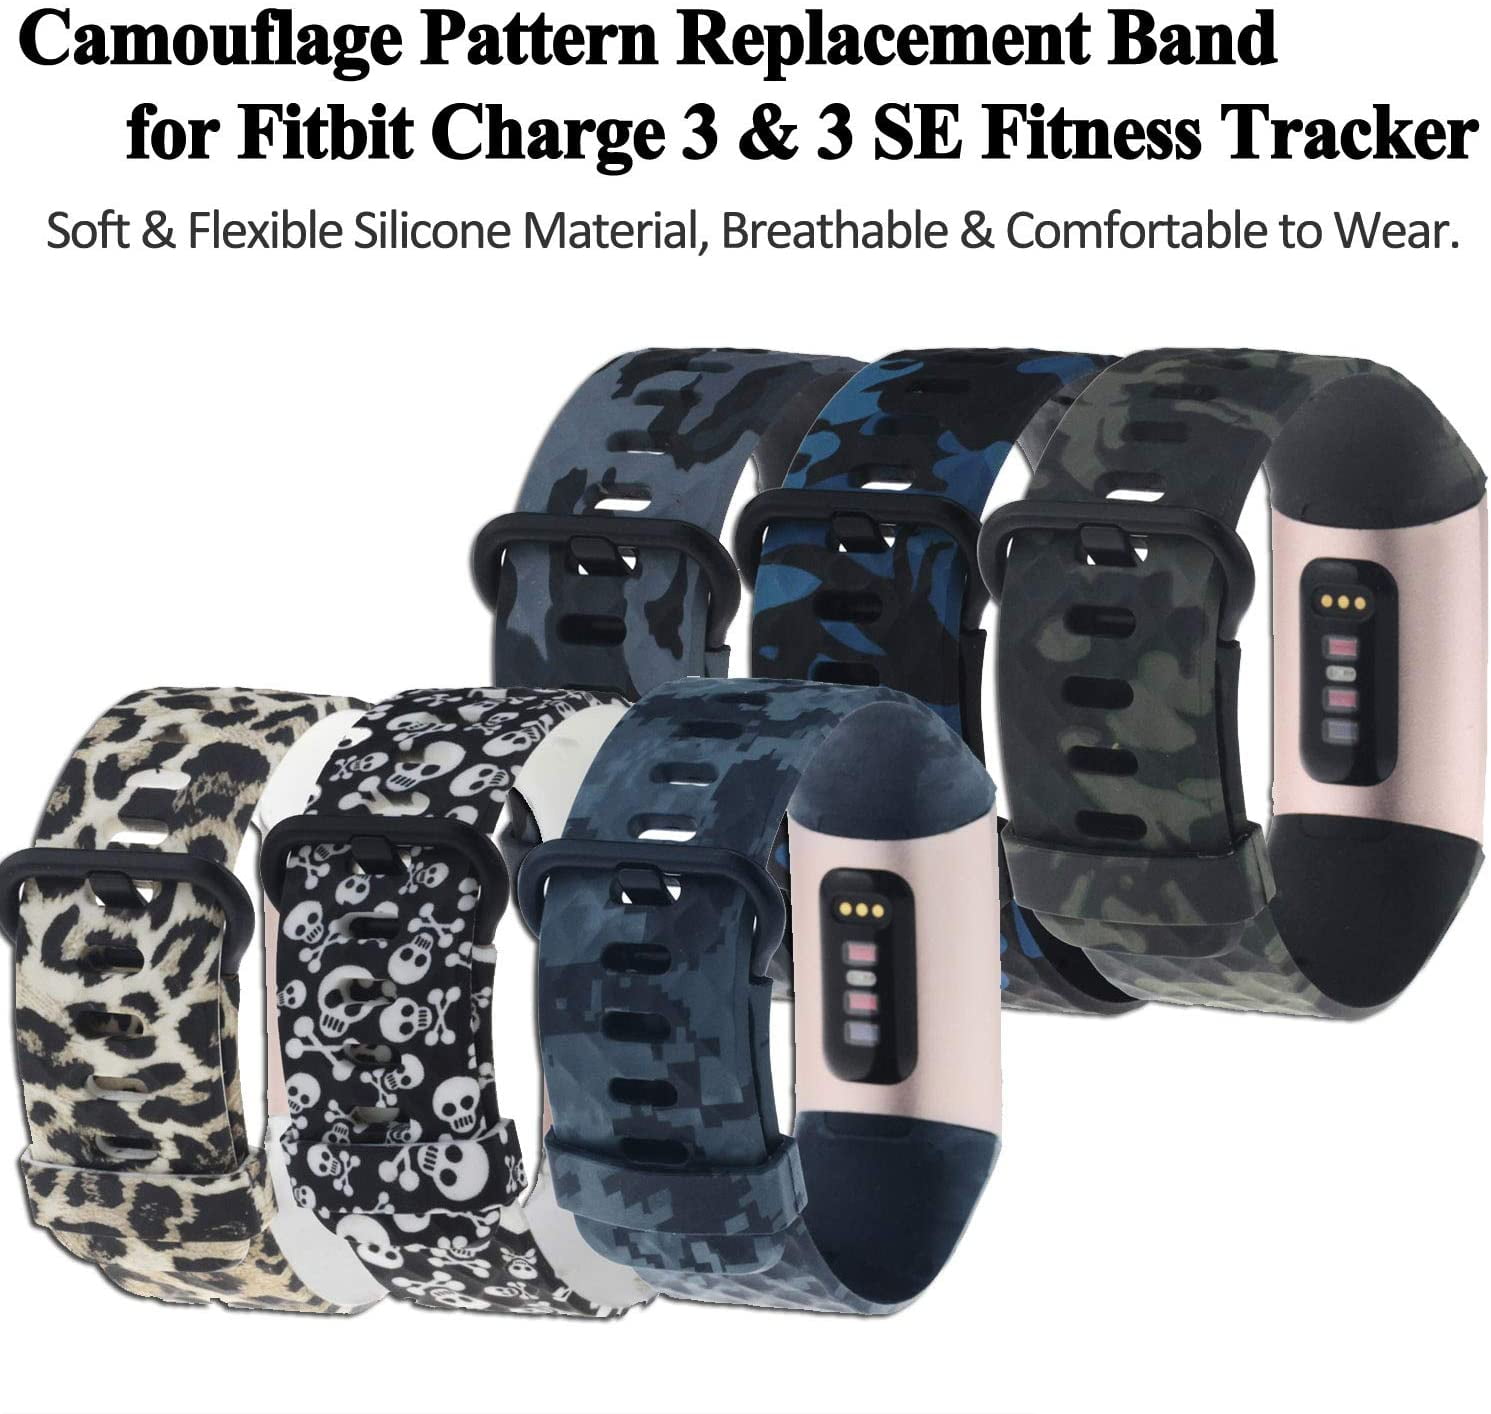 Breathable Pattern Printed Strap Floral Bands for Fitbit Charge 4 Charge 3,SE 